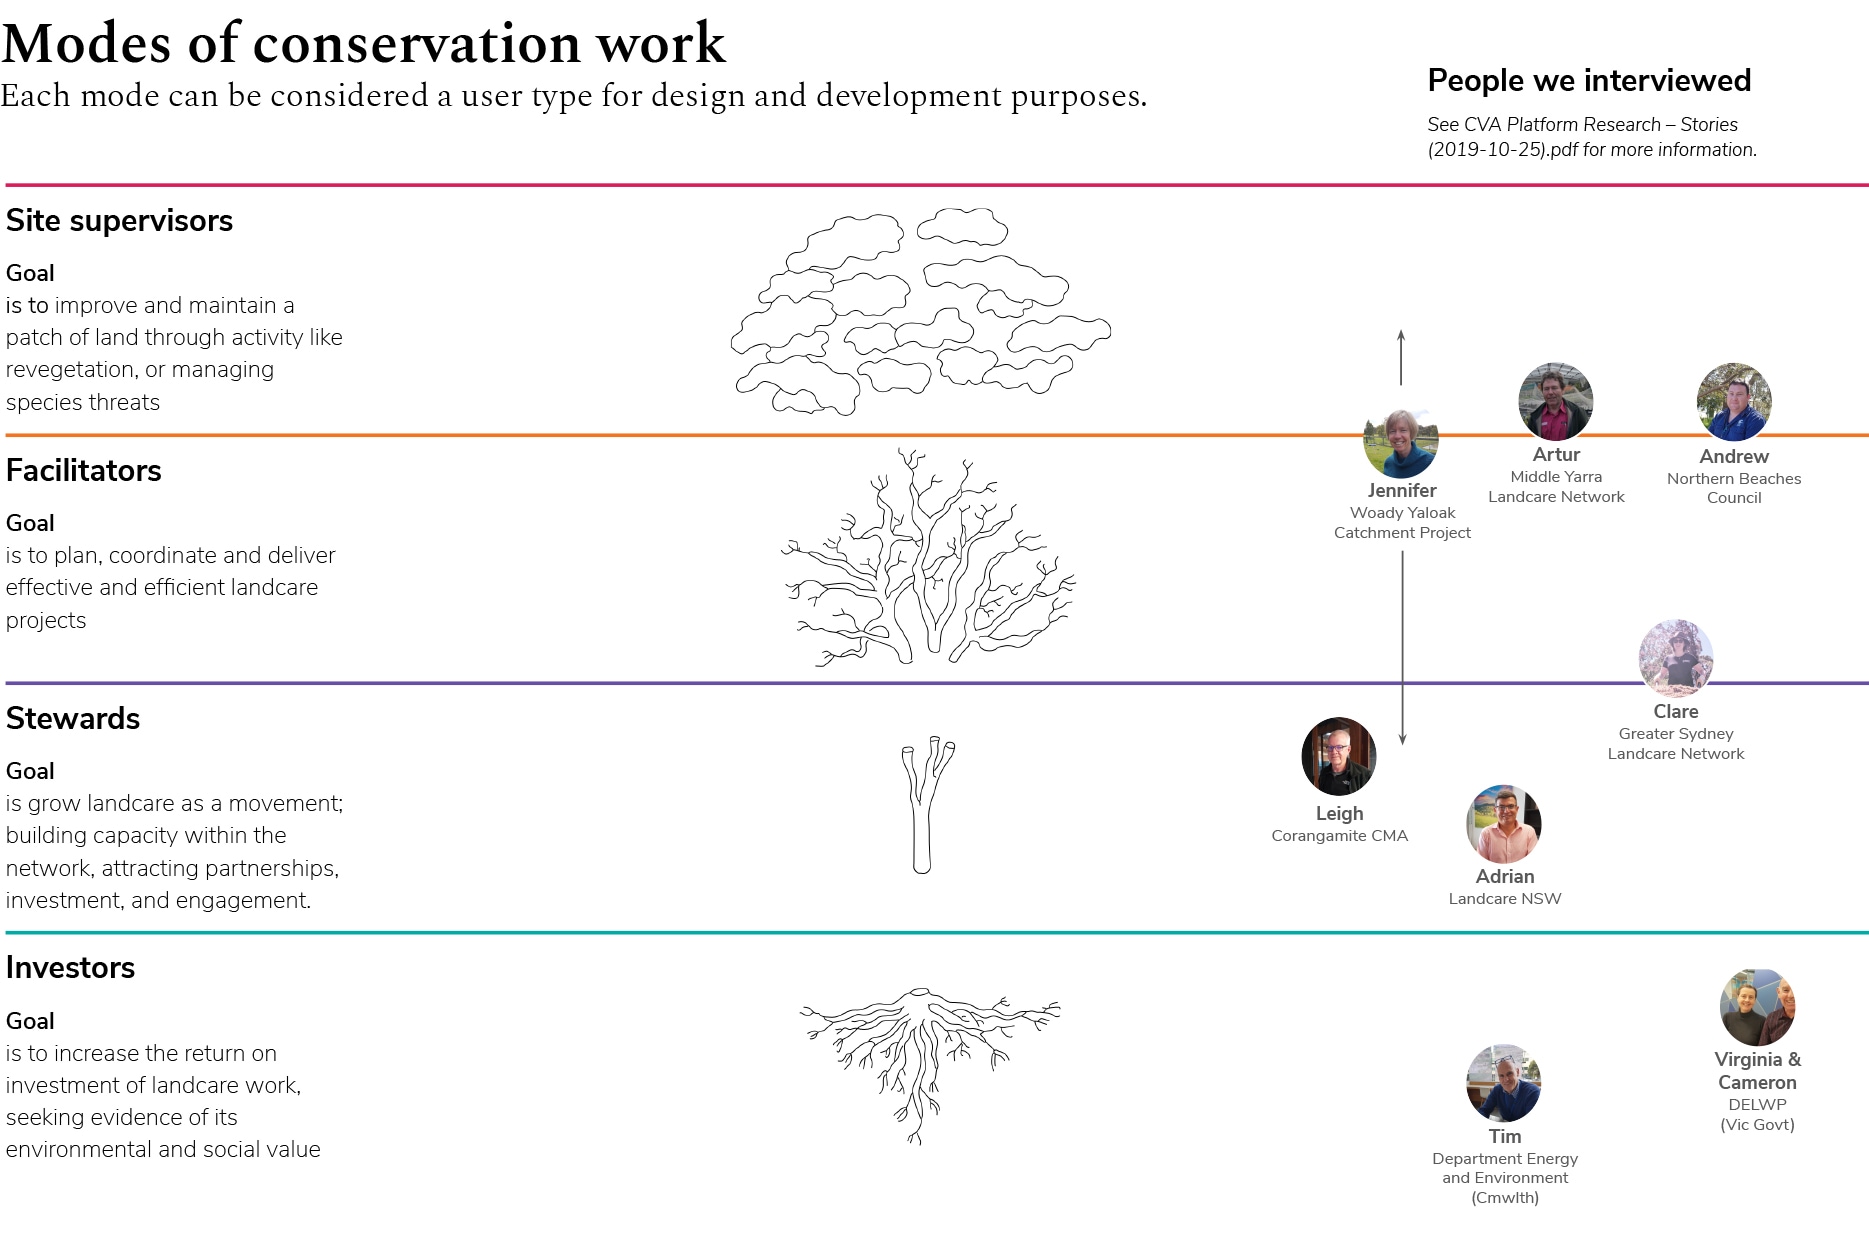 A diagram showing the 'modes of conservation work' and the research participants who correspond to that mode. 